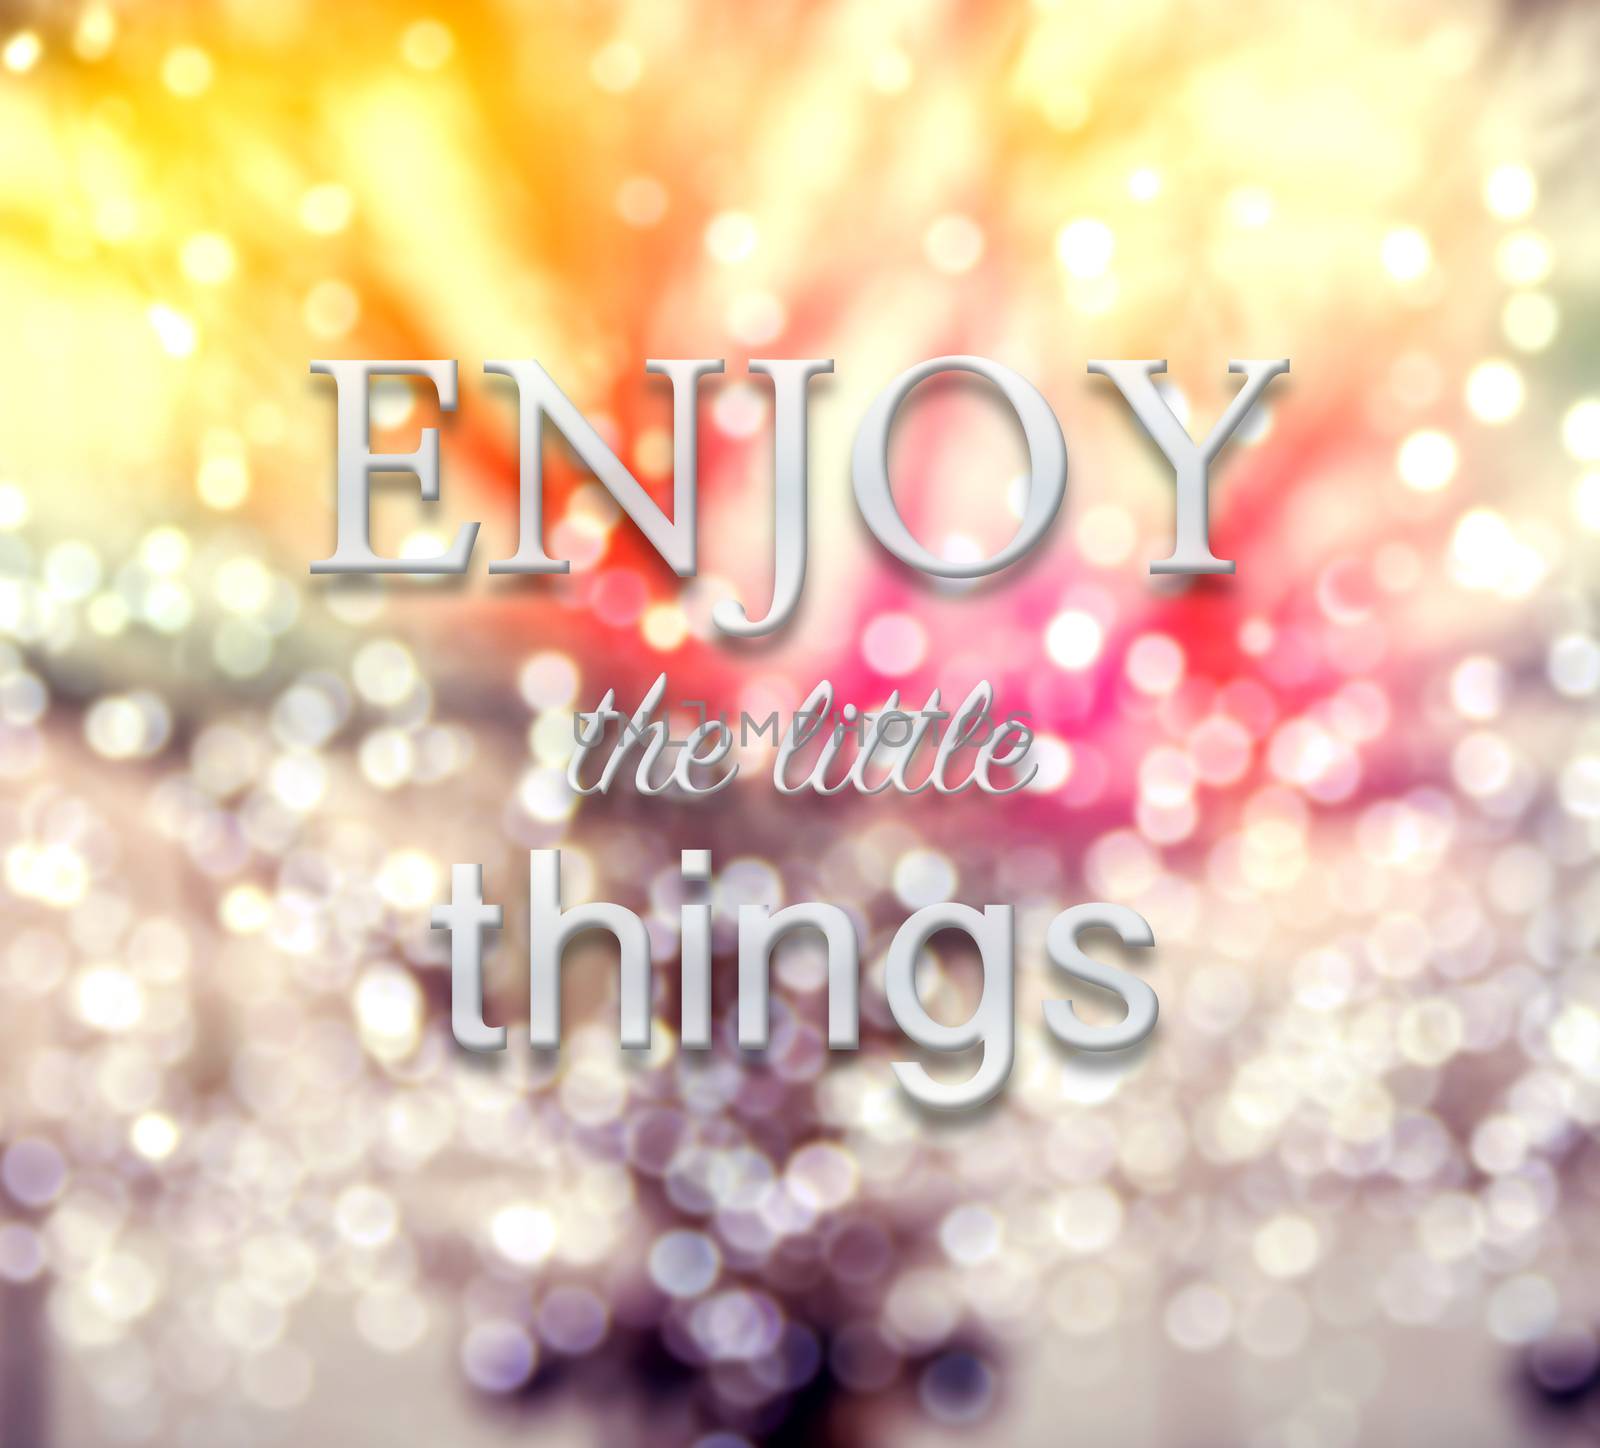 Enjoy the little things - white tone words of inspirational typographic quote on winter tree and defocus bokeh background,, vintage and retro style.